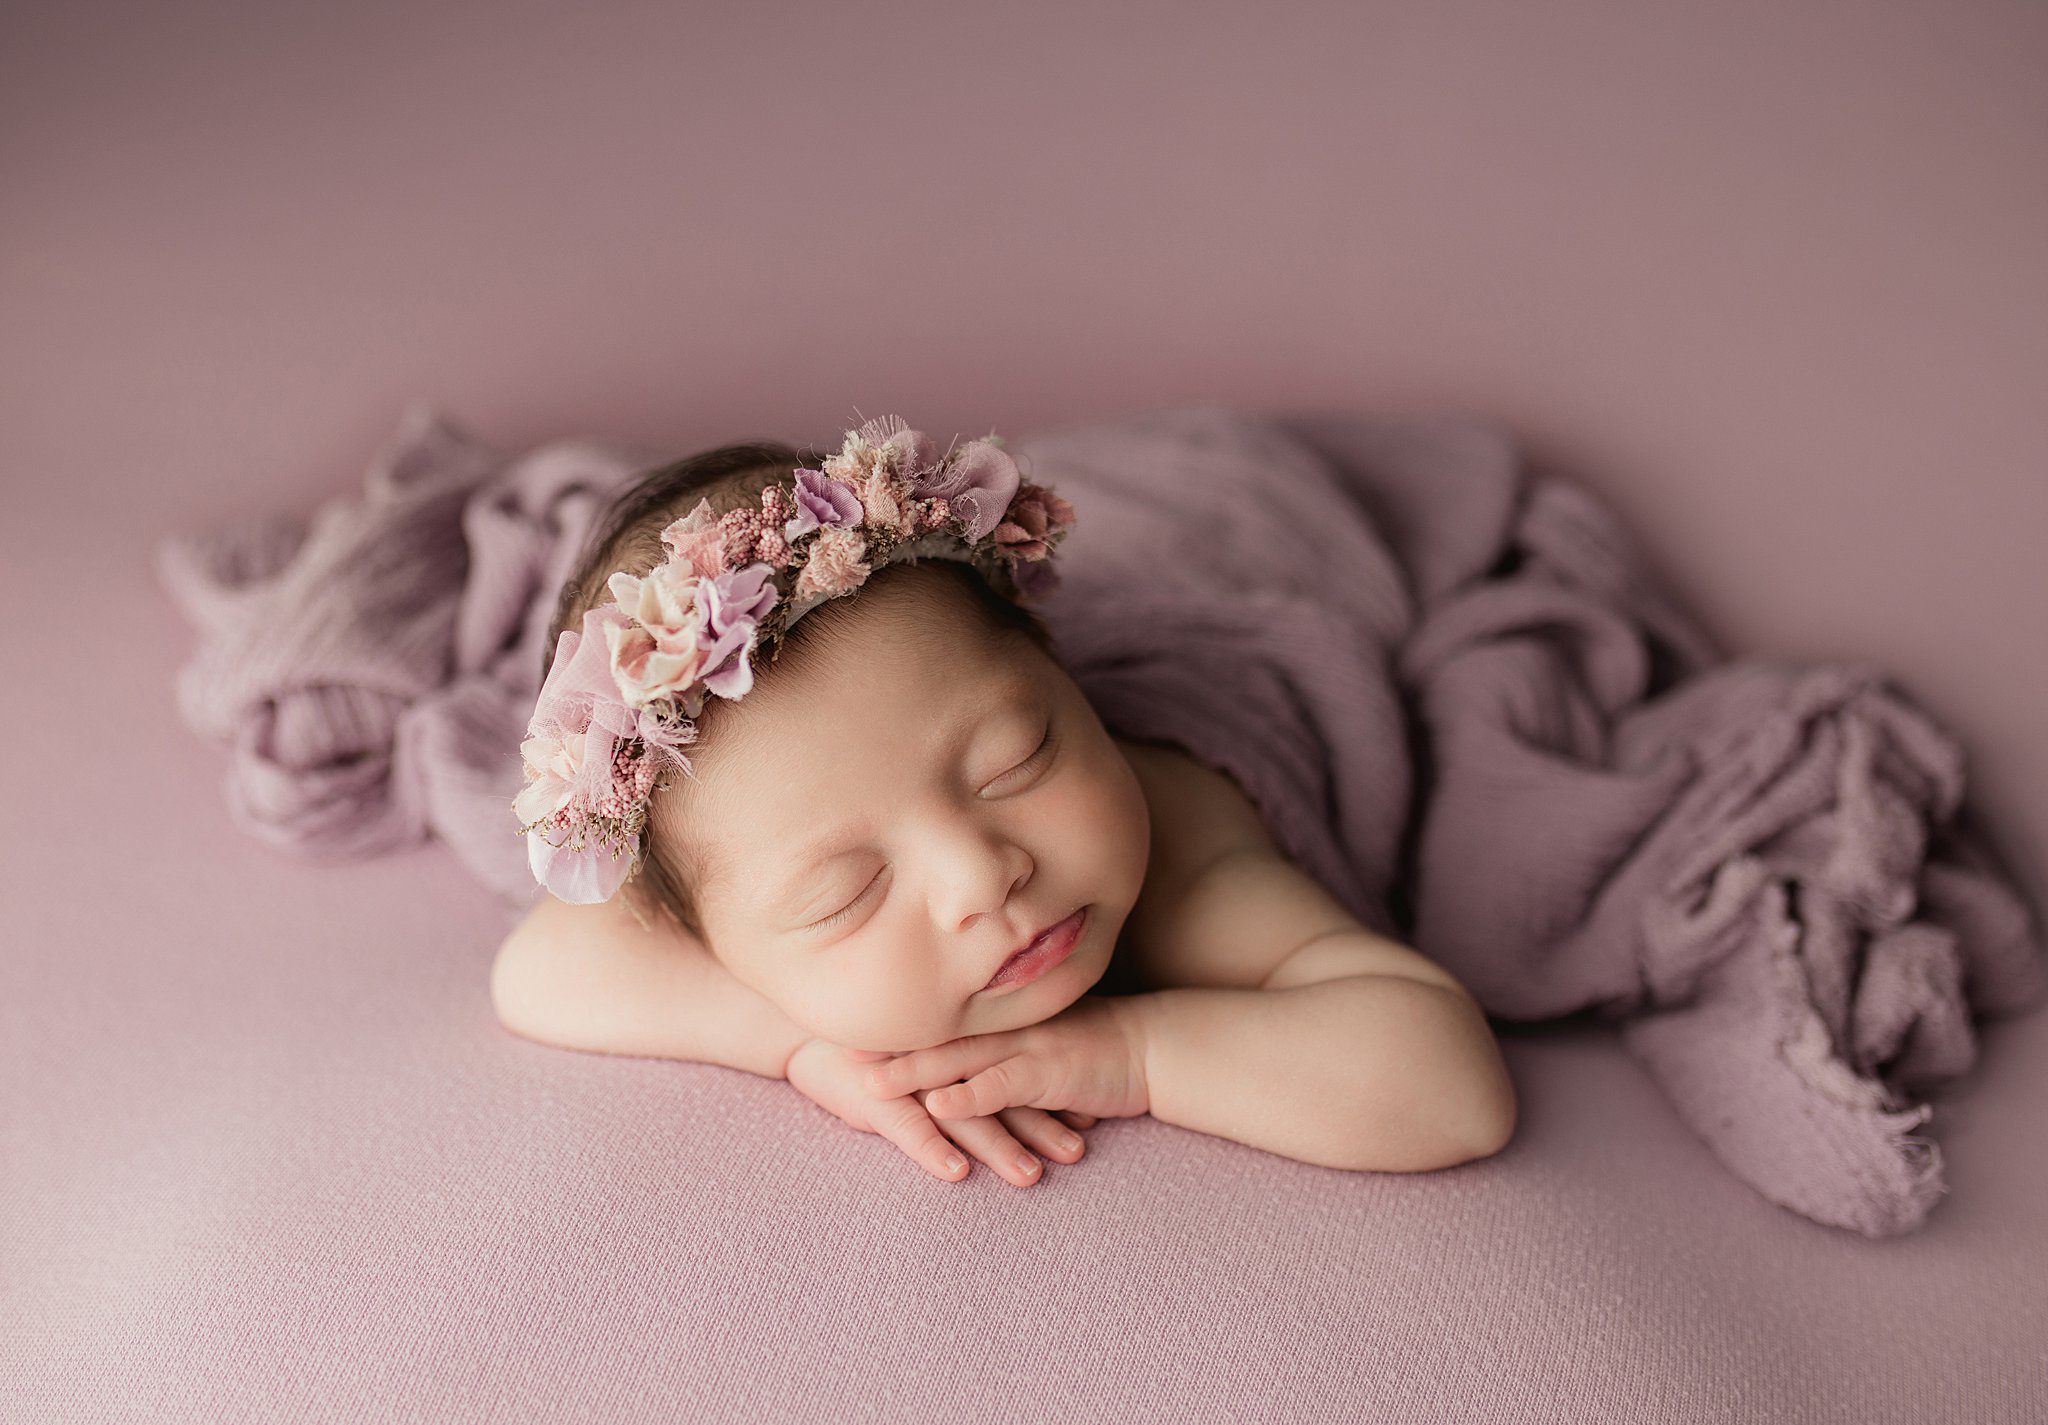 A newborn baby sleeps on a purple bed on her hands in a floral headband before some things to do in anaheim with kids